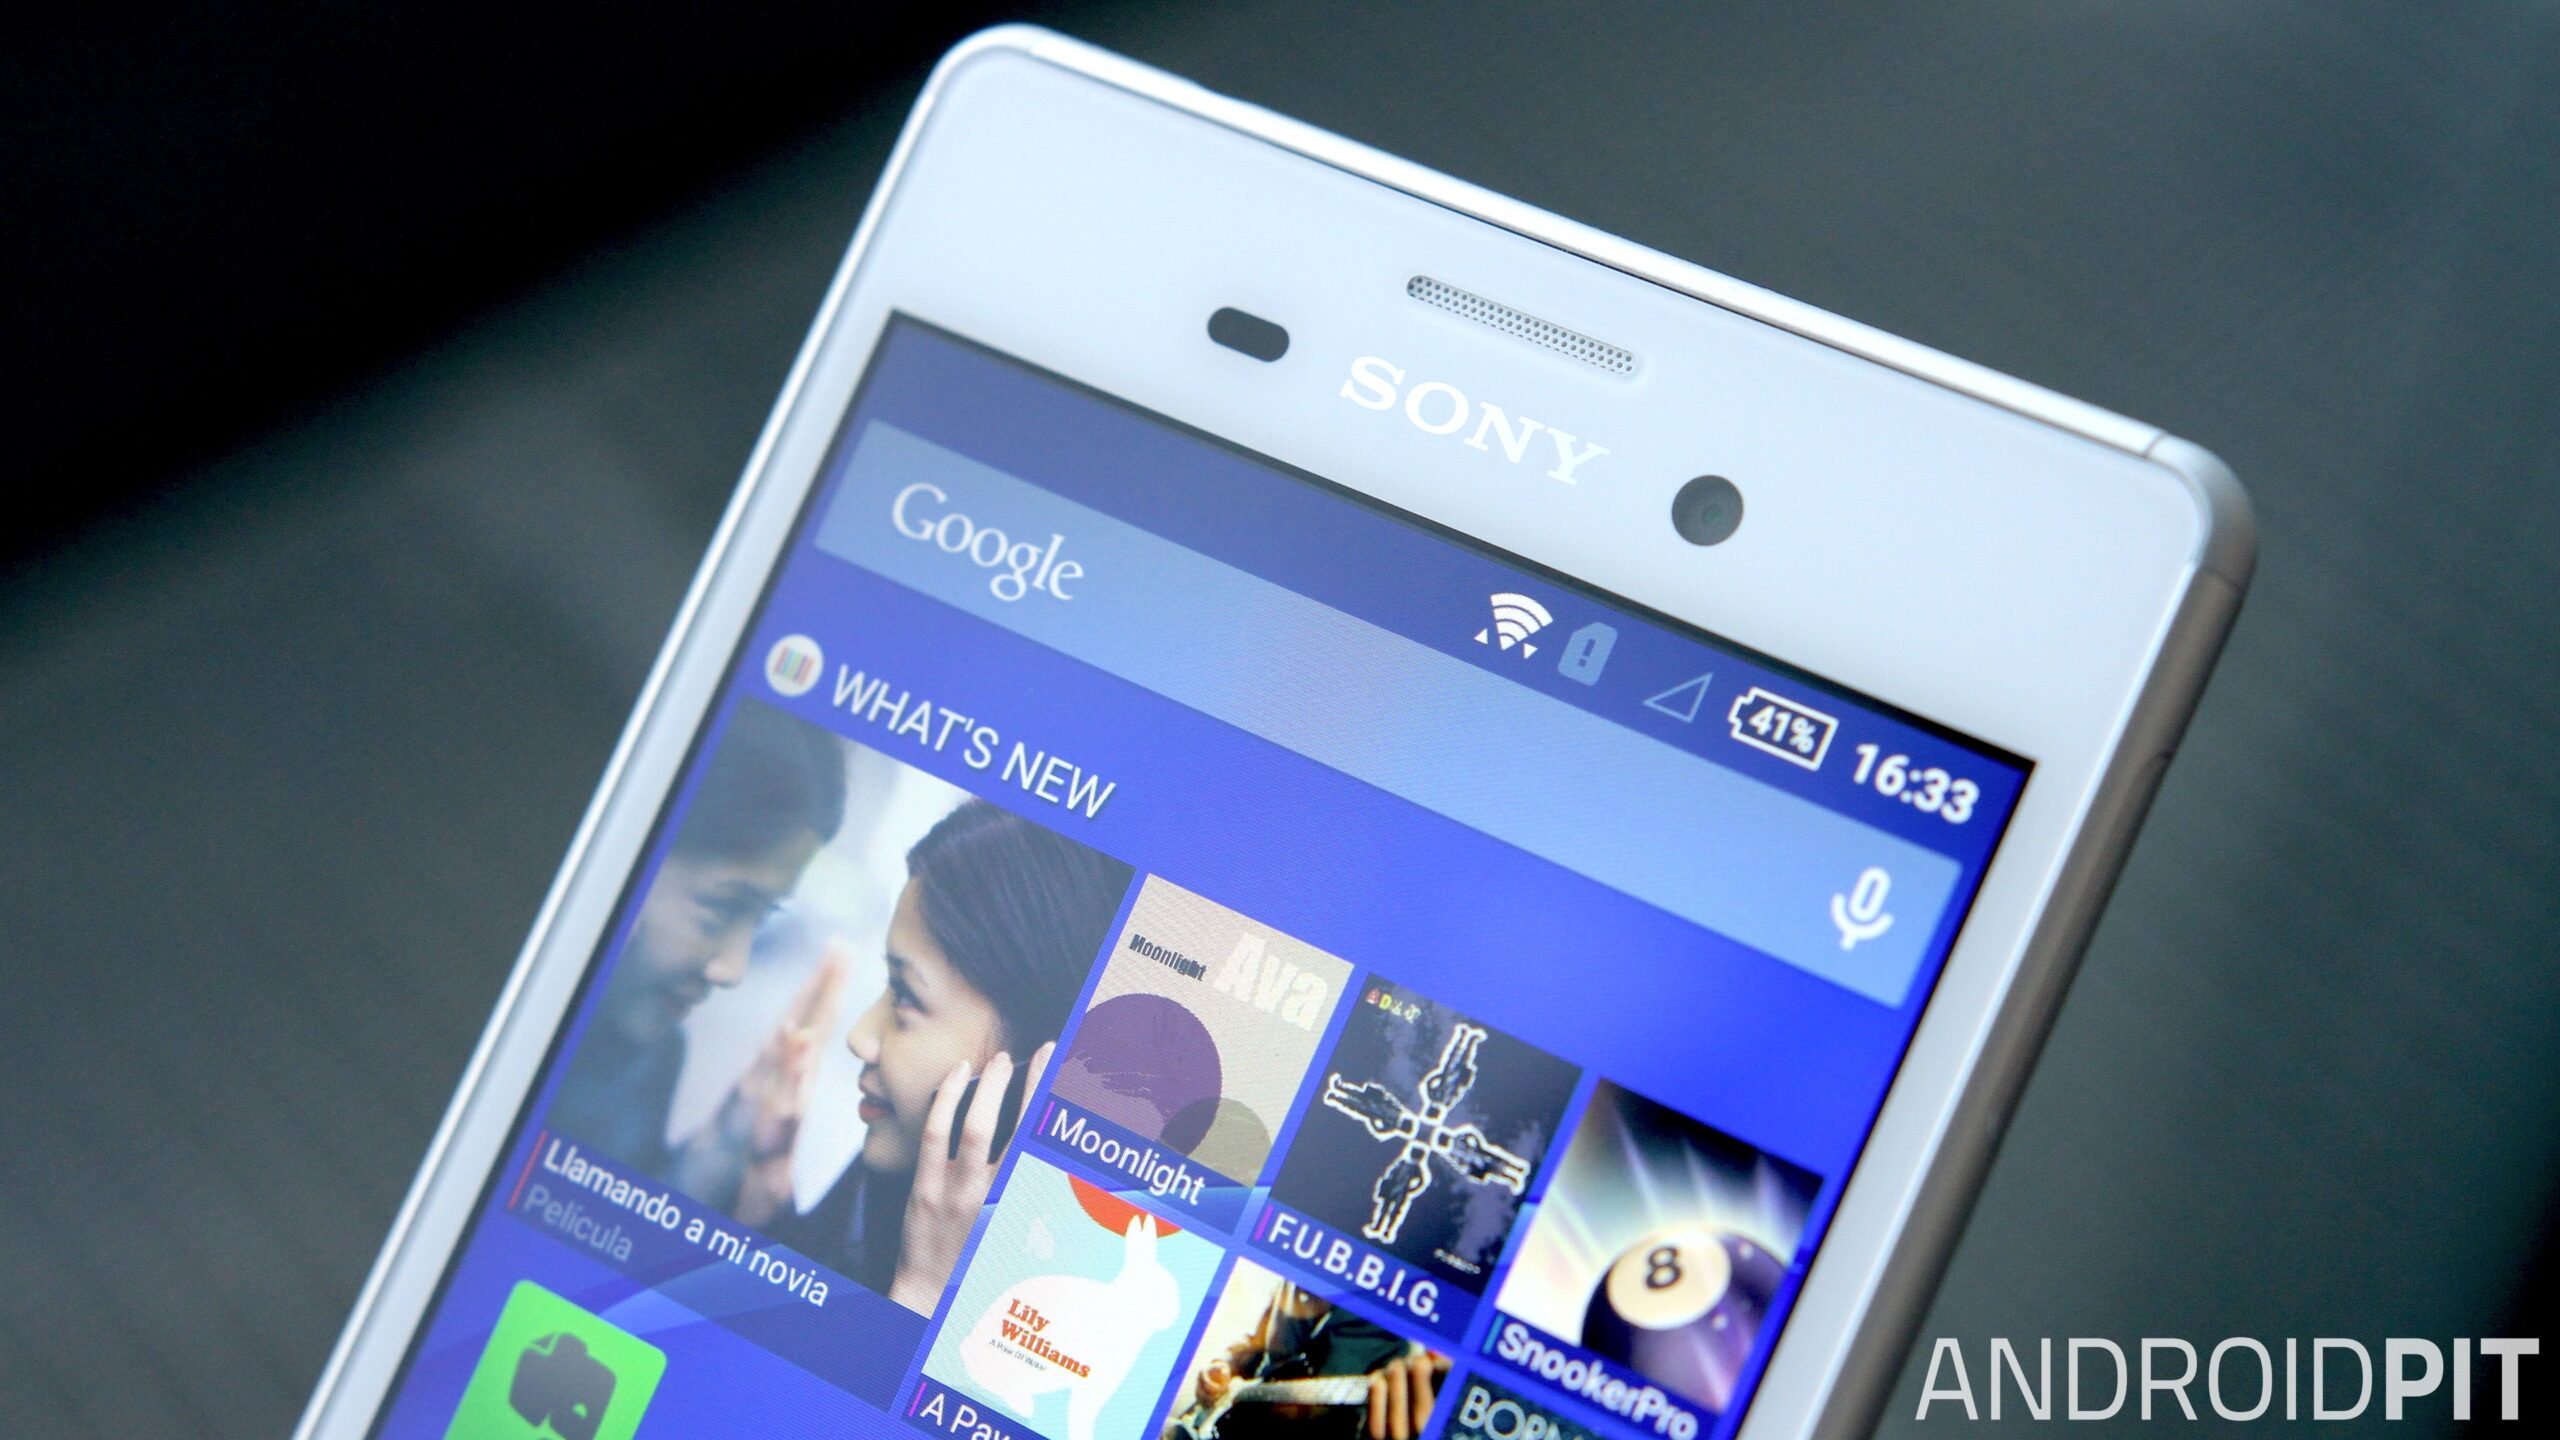 10 tips and tricks for the Sony Xperia M4 Aqua: get the most out of your device!